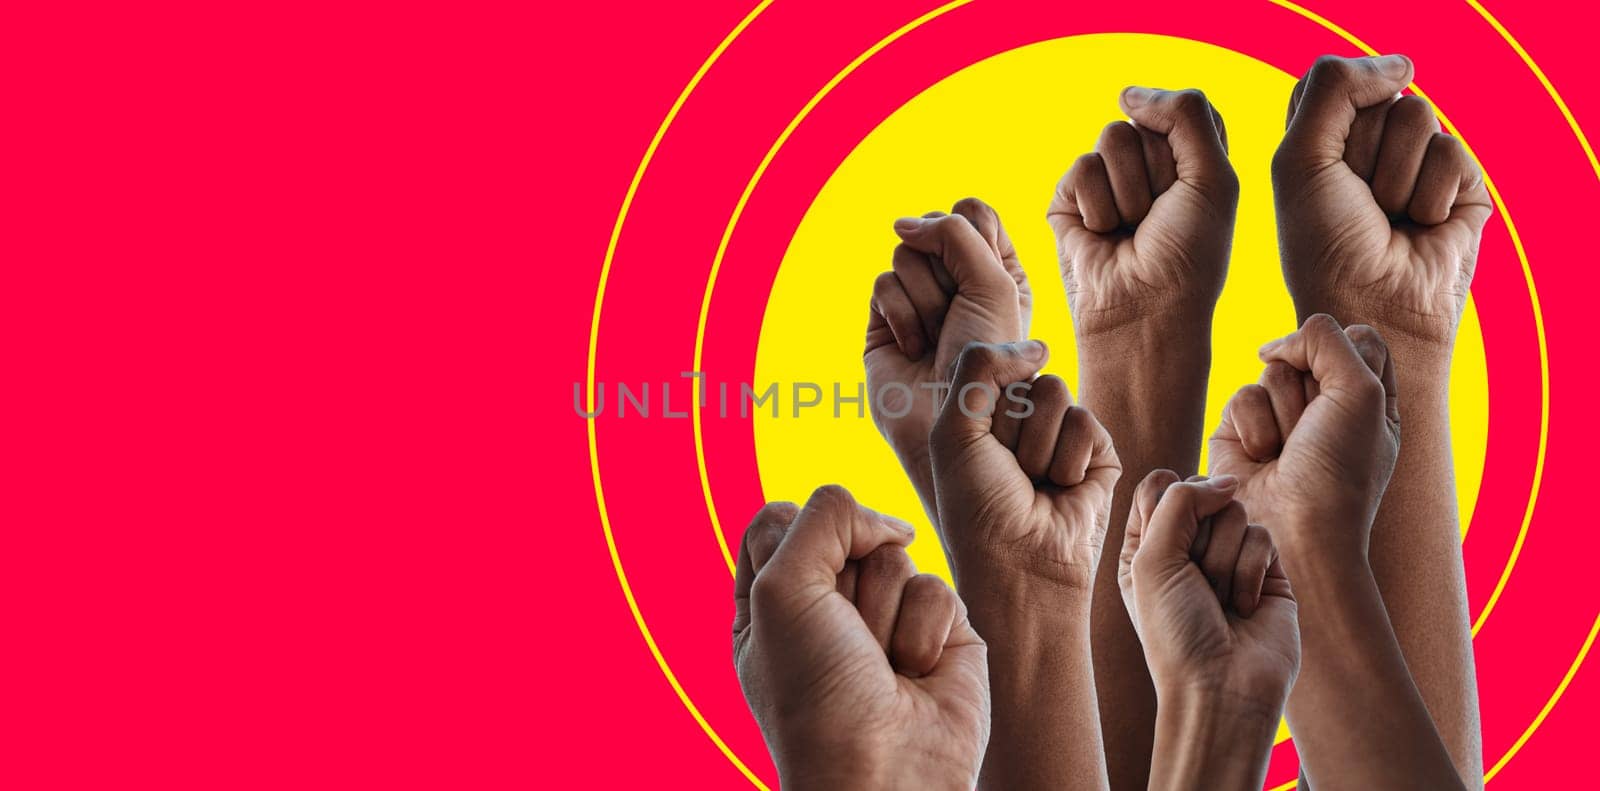 Fist, group and protest with art by red background for human rights, power and solidarity for equality. People, support and together with hands in air for motivation, goal or mockup space for opinion by YuriArcurs